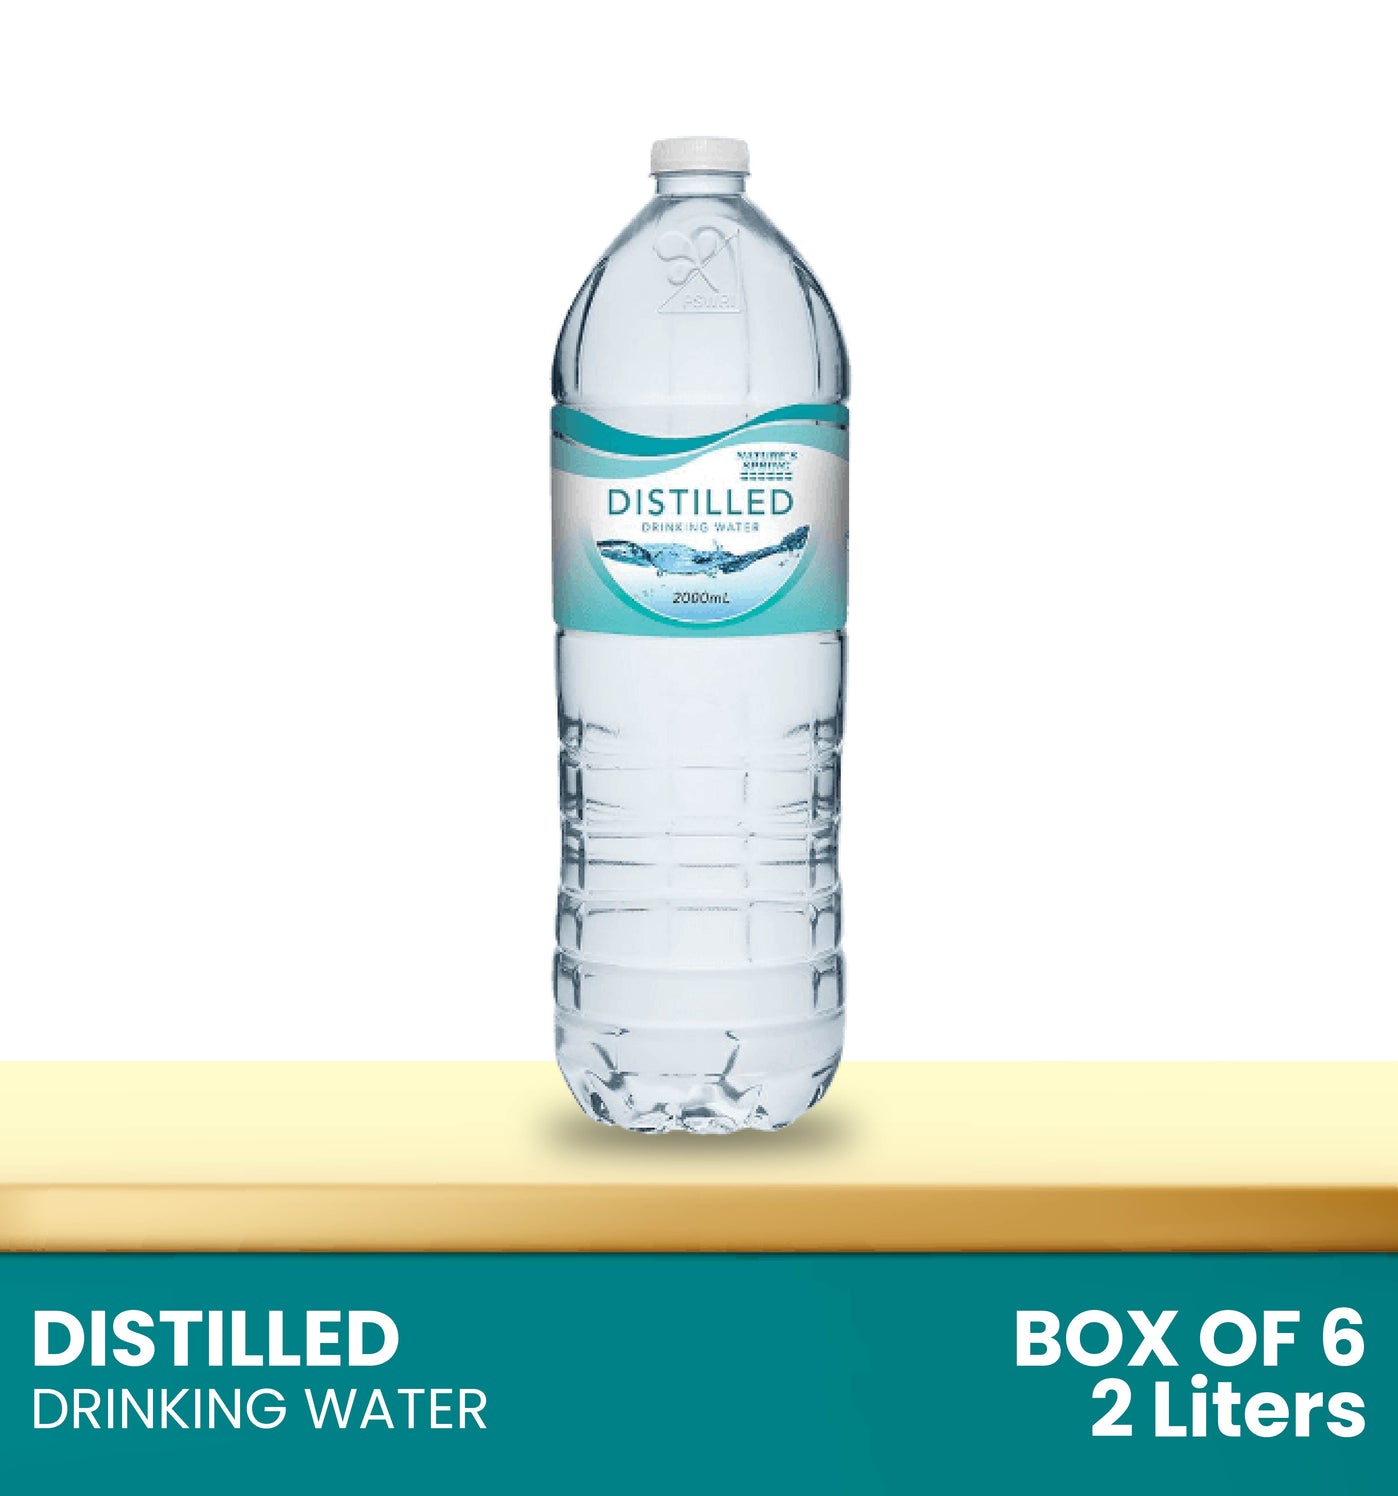 Nature's Spring Distilled Drinking Water 2 Liters